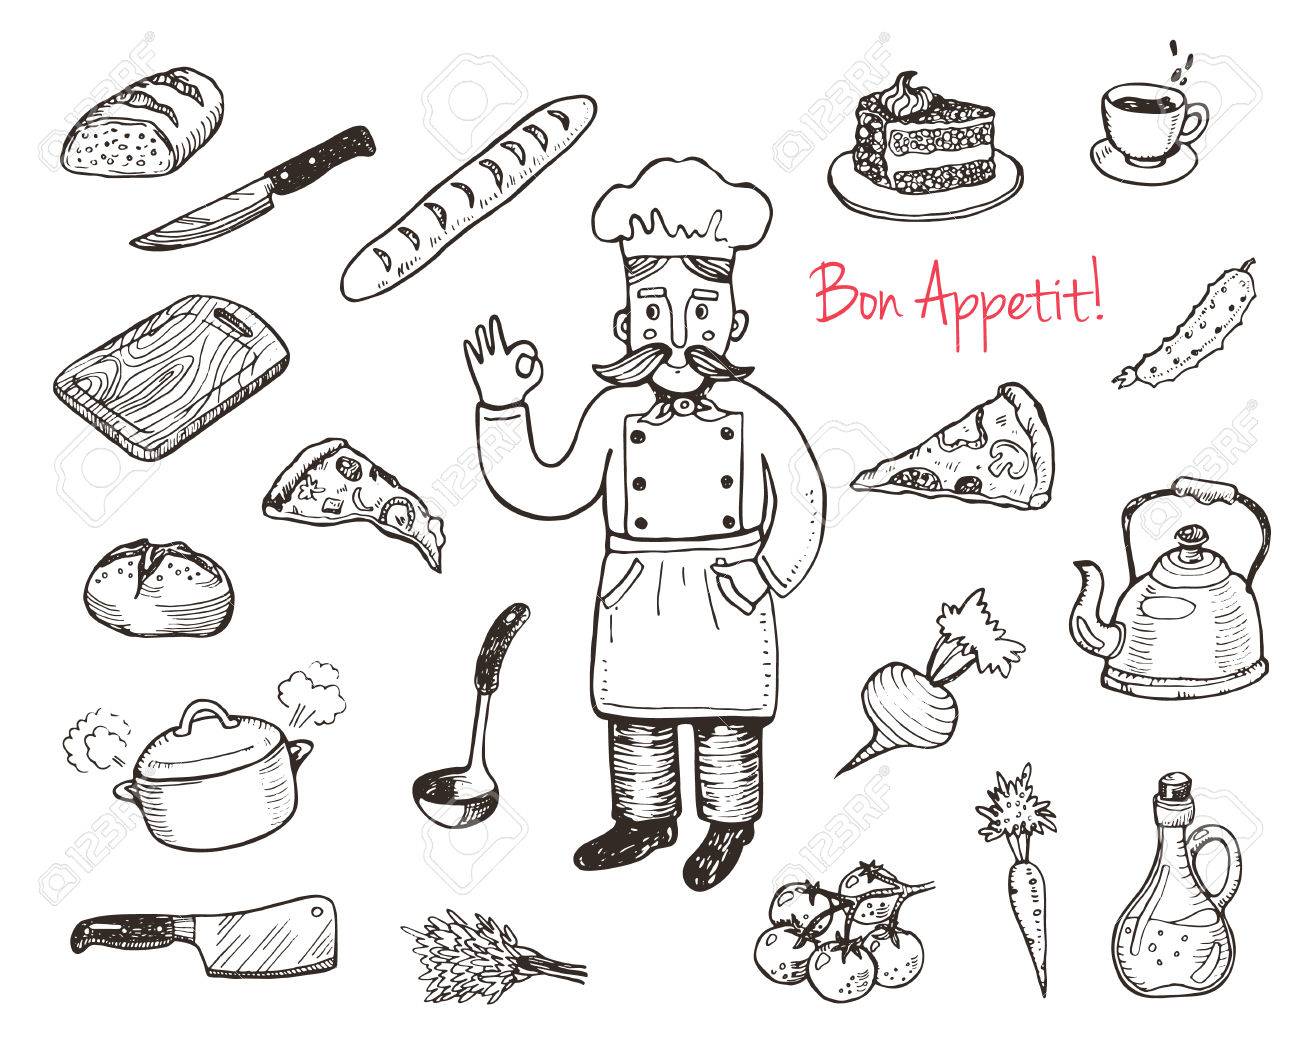 The best free Cooking drawing images. Download from 525 free drawings